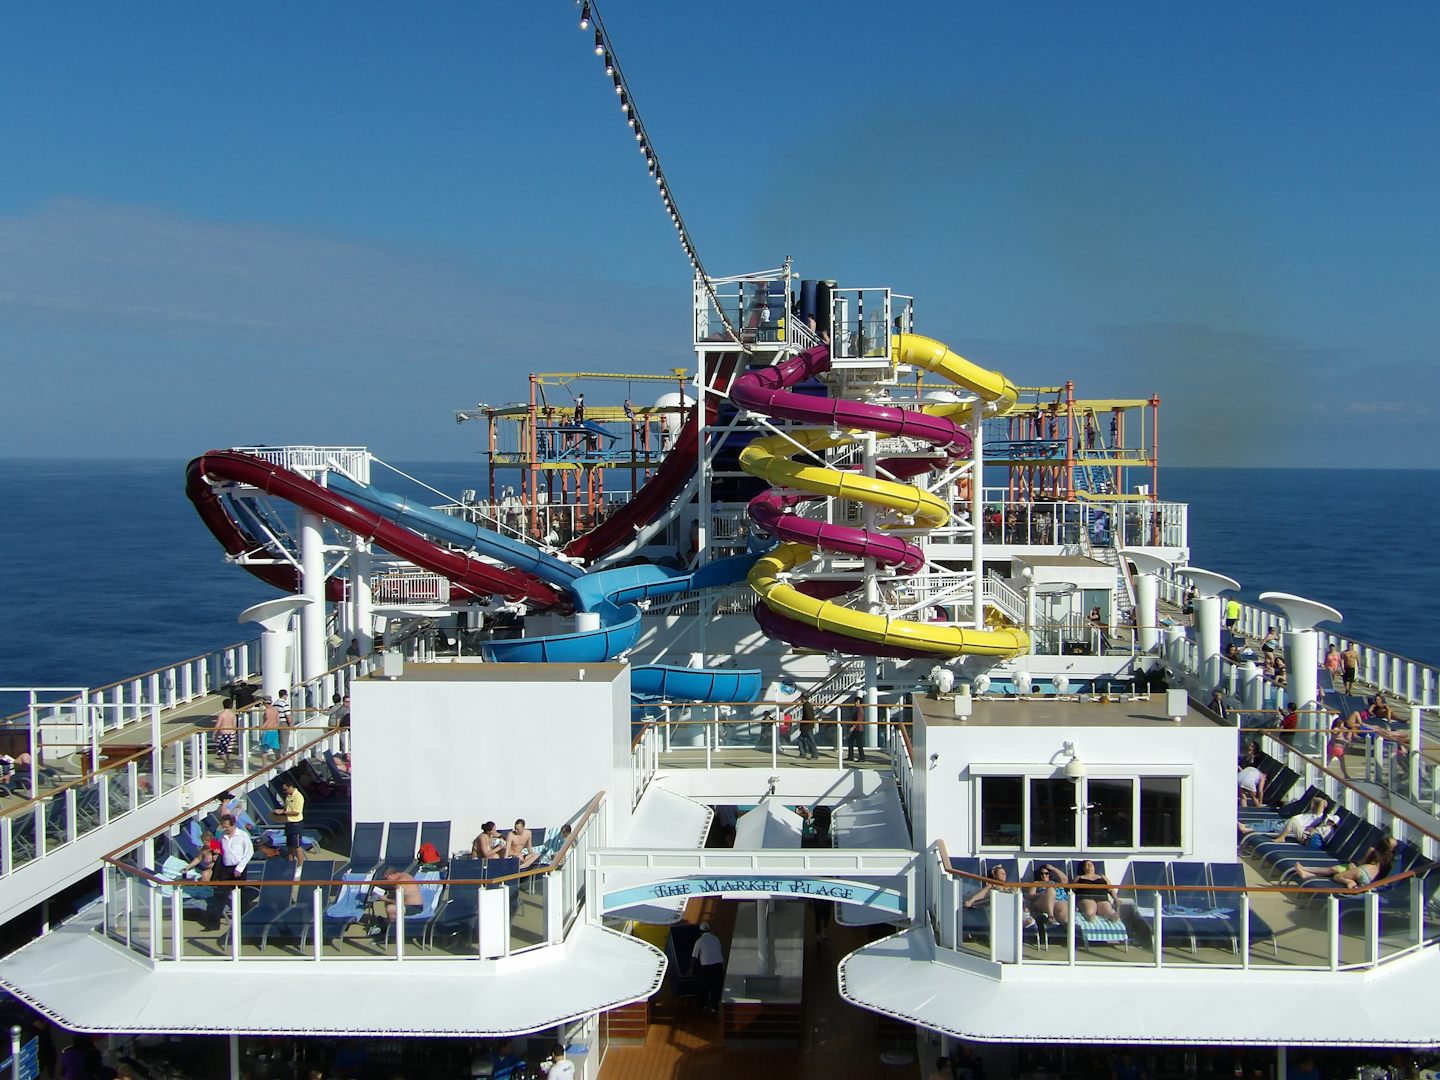 The top of the ship. waterslide